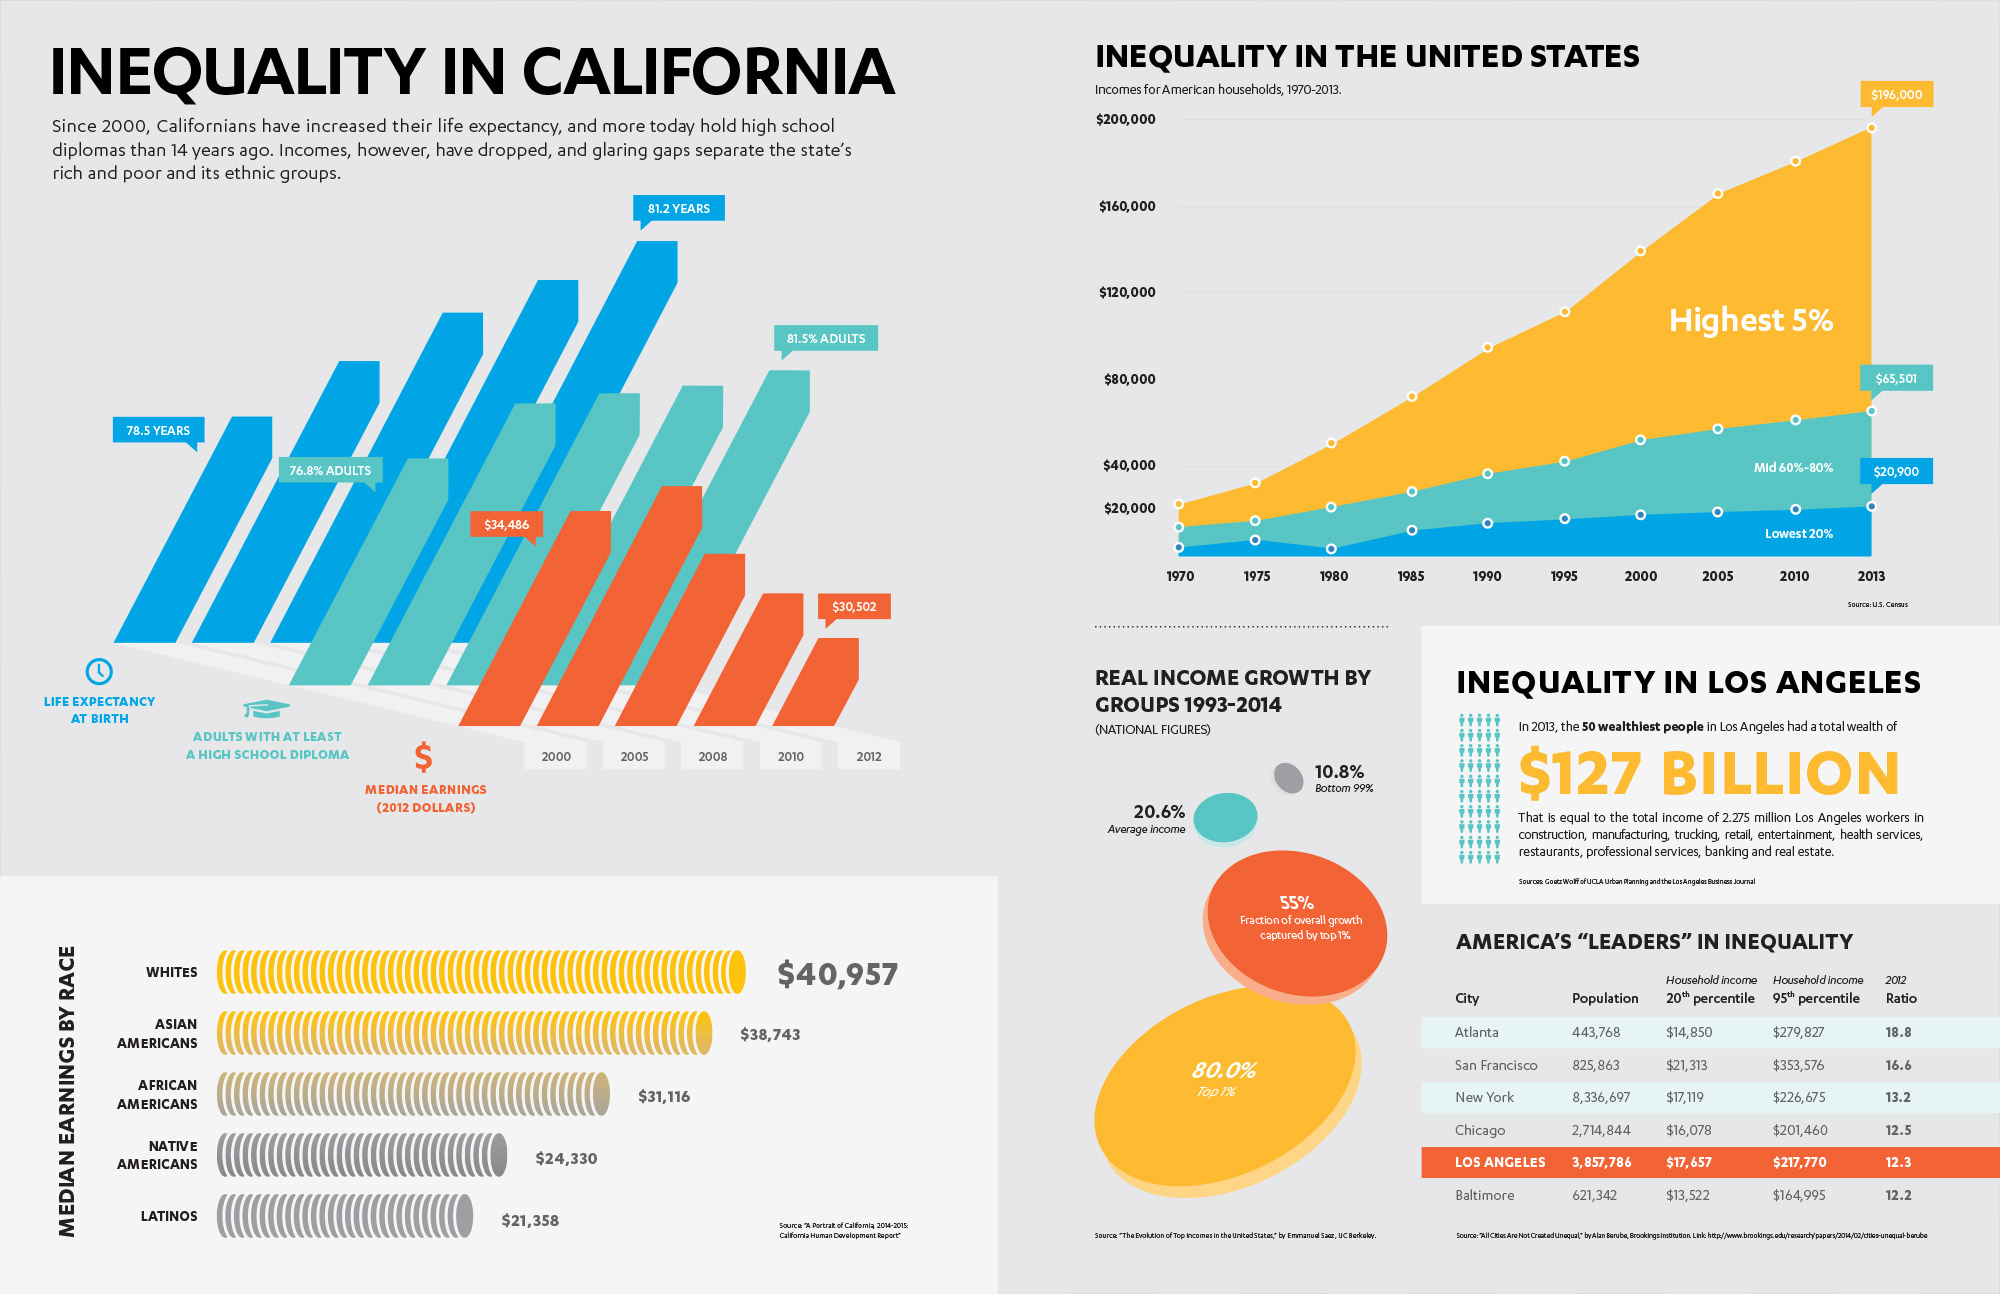 http://blueprint.ucla.edu/infographic/poverty-inequality-by-the-numbers/